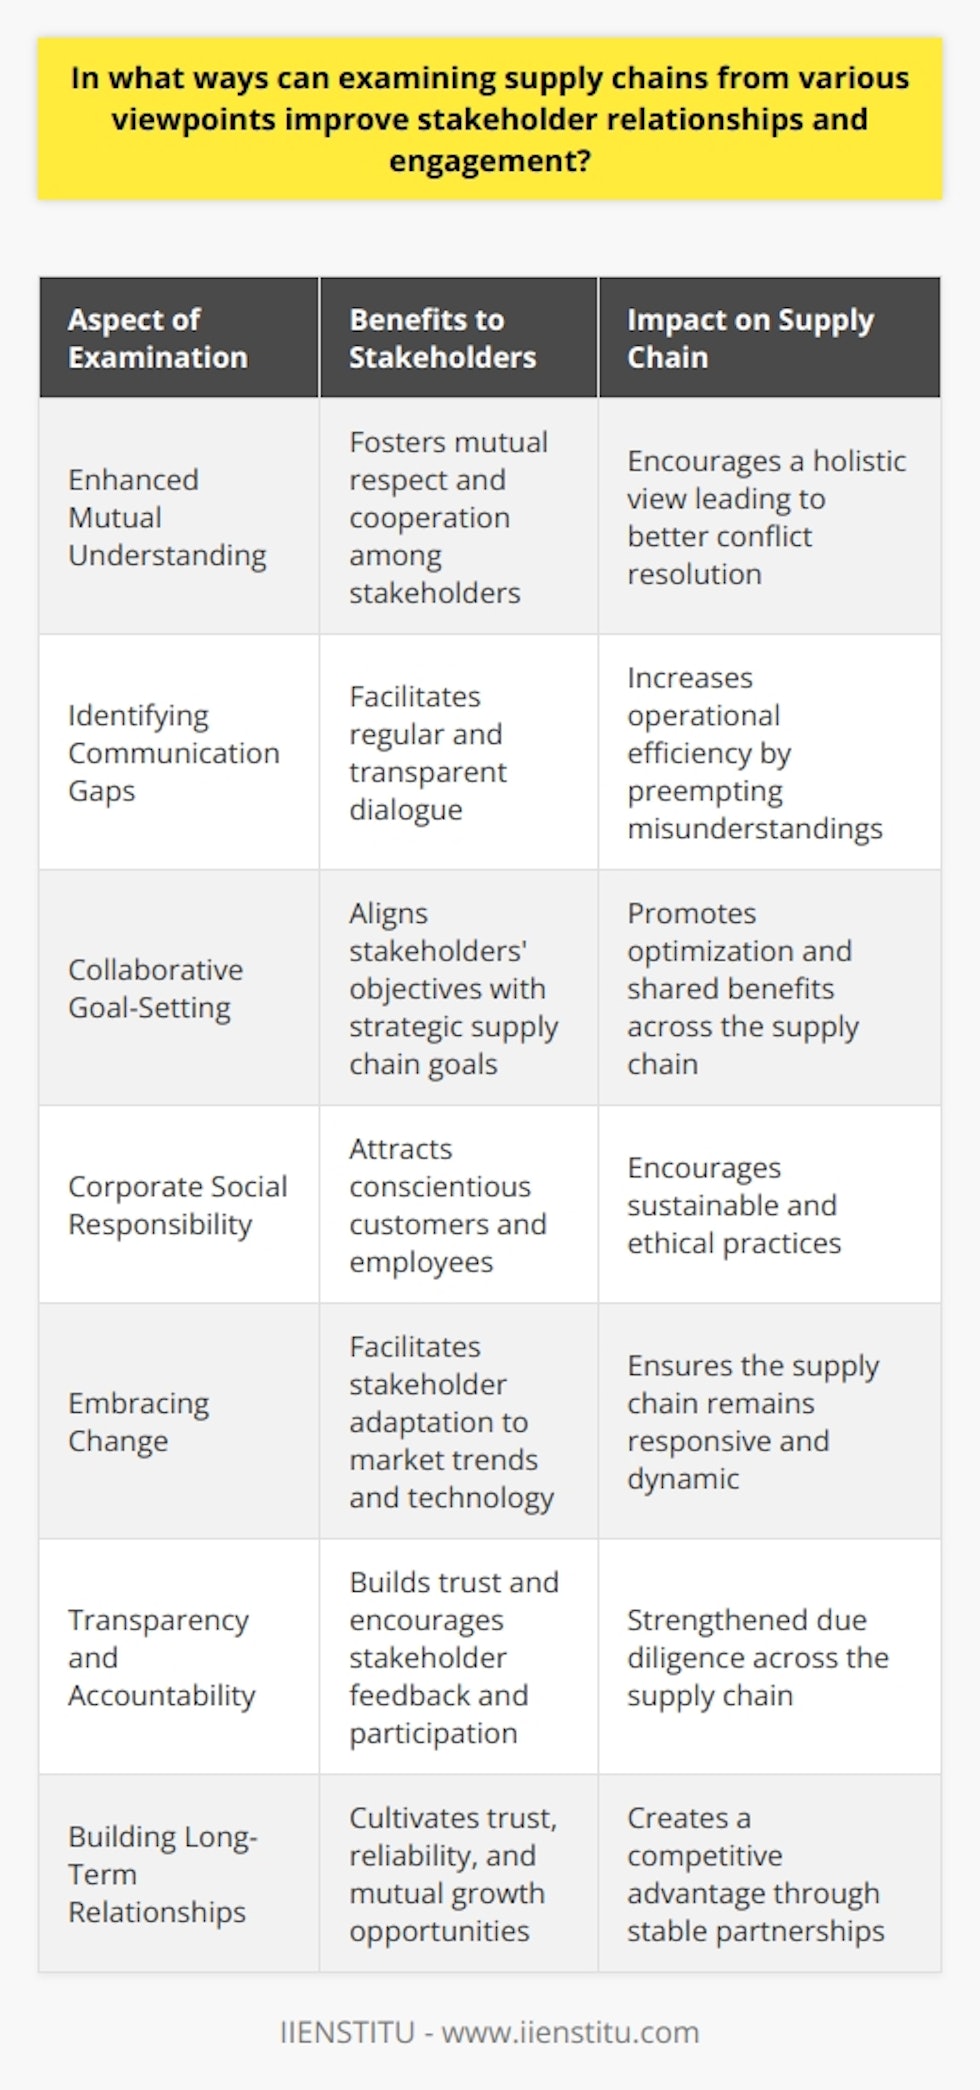 Supply chain management is a multifaceted realm that necessitates a comprehensive understanding of various stakeholders’ perspectives. This approach is crucial in fostering strong relationships and engagement, which are cornerstones of a sustainable and efficient supply chain. Here are ways in which examining supply chains from different viewpoints can have a positive impact on stakeholder relationships and engagement.Enhancing Mutual UnderstandingBy exploring the supply chain from diverse angles – such as those of suppliers, distributors, customers, and even communities impacted by supply chain activities – companies gain a holistic view of the network’s complexities. This enhanced understanding allows stakeholders to appreciate each other’s challenges and contributions, fostering a sense of mutual respect and cooperation.Identifying and Bridging Communication GapsUnderstanding different perspectives also highlights communication gaps between stakeholders, which can then be bridged to ensure a more seamless operation. Regular and transparent dialogue helps preempt misunderstandings and resolves issues promptly, thereby increasing the efficiency of the supply chain.Facilitating Collaborative Goal-SettingSupply chains function optimally when all stakeholders work towards a common set of goals. By appreciating different viewpoints, organizations can help align stakeholders' diverse objectives with the strategic direction of the supply chain, leading to shared benefits.Promoting Corporate Social ResponsibilityAn increased awareness of the social and environmental implications of supply chain operations encourages stakeholders to adopt more sustainable and ethical practices. This perspective attracts conscientious customers and employees who are looking for more than just financial gains from their associations with organizations.Embracing Change for Better ResponsivenessSupply chains are dynamic by nature, and stakeholder needs and expectations can shift rapidly due to various factors like technology, market trends, or regulatory changes. Regular examinations from different perspectives allow organizations to anticipate and adapt to these shifts more effectively, ensuring stakeholders remain engaged and supportive.Ensuring Transparency and AccountabilityAnalyzing supply chains from multiple viewpoints reinforces the need for transparency and accountability, particularly in an age where stakeholders have increasing concerns about the ethics of sourcing, labor conditions, and environmental stewardship. Transparent practices not only build trust but also foster a culture where stakeholders are more inclined to provide input and raise concerns, knowing they will be duly acknowledged and addressed.Building Long-Term RelationshipsBy consistently considering the interests and viewpoints of various stakeholders, companies build long-standing partnerships based on trust, reliability, and mutual growth. These enduring relationships become a competitive advantage, as they contribute to a more stable and resilient supply chain.In summary, examining supply chains from various viewpoints is essential for enhancing stakeholder relationships and engagement. Such a comprehensive approach is beneficial not only for dealing with contemporary complexities but also for adapting to future changes with agility and confidence. As organizations continue to operate in an increasingly interconnected world, the ability to understand and integrate diverse stakeholder perspectives will be a defining factor in achieving and sustaining supply chain excellence.